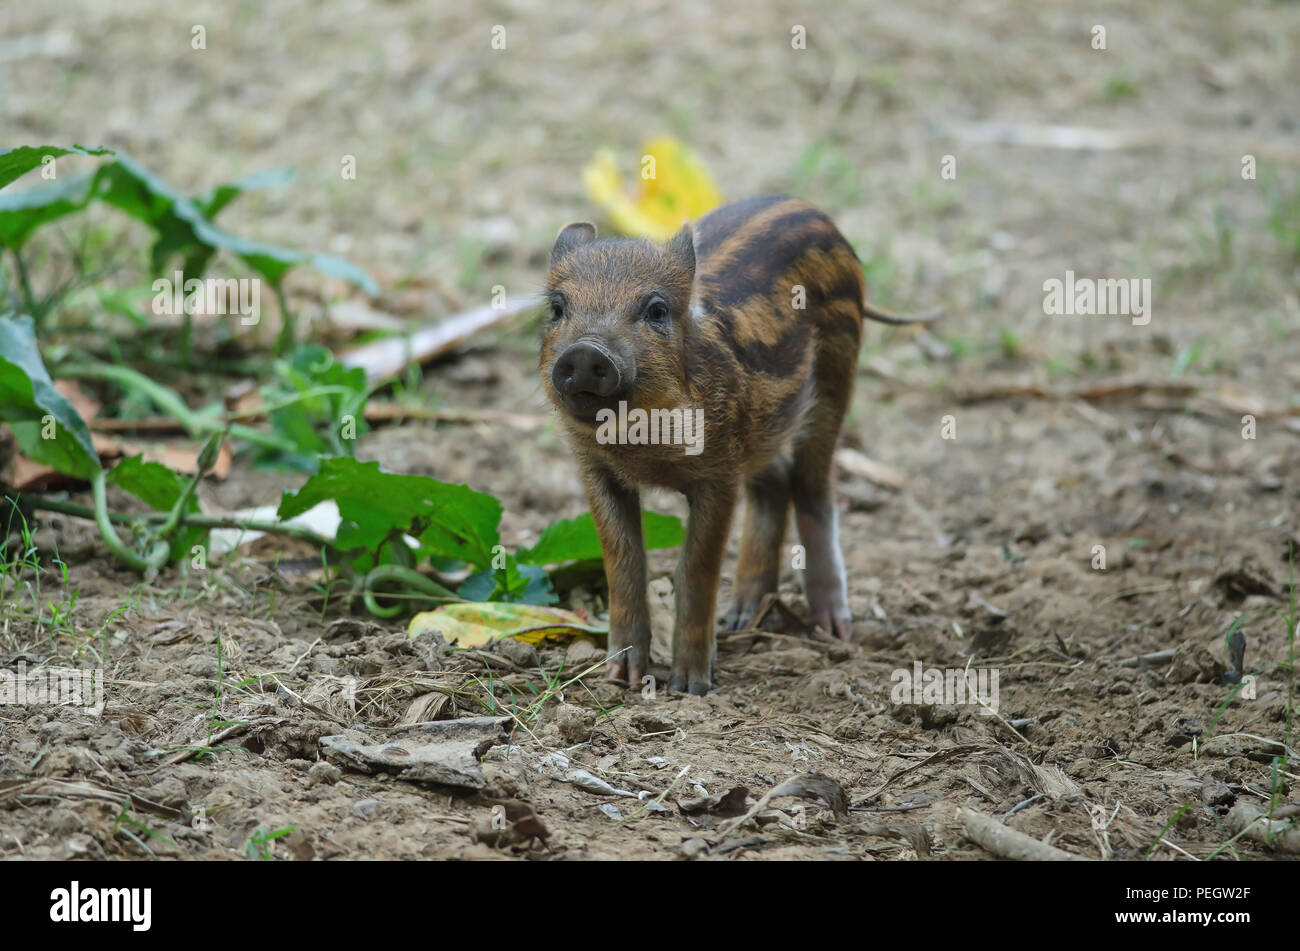 Young Wild Pig or Young wild board piglet (sus scrofa) Stock Photo